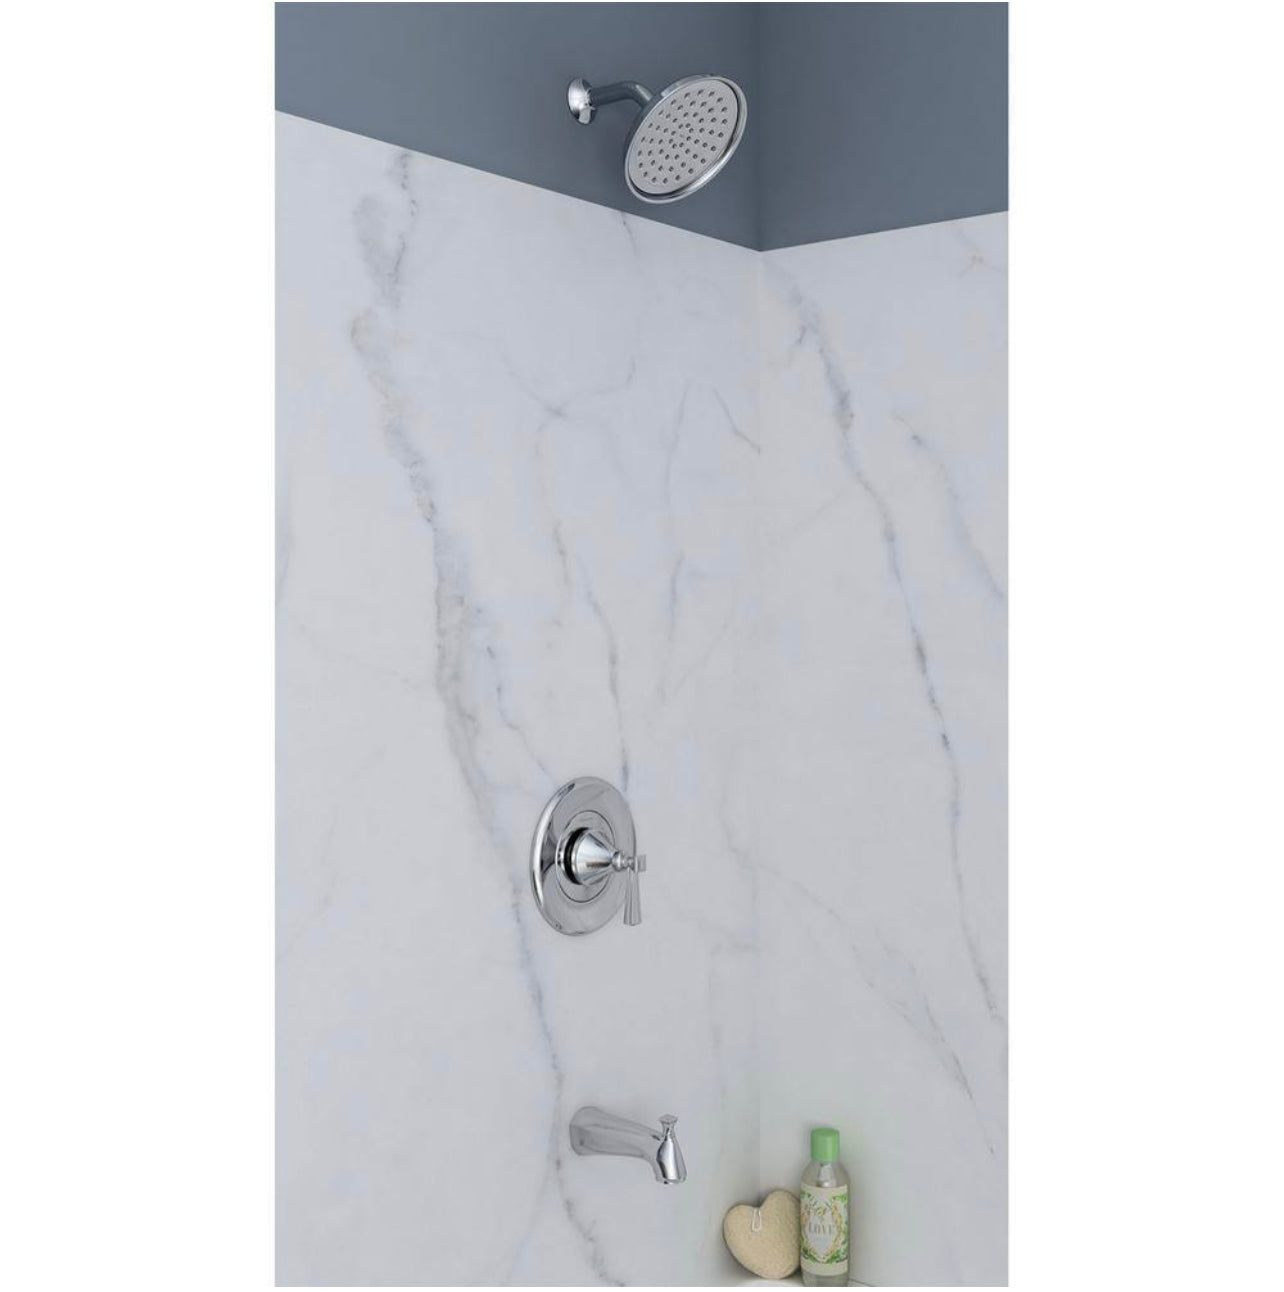 American Standard Rumson Single Handle 1 Spray Tub and Shower Faucet with 1.8 GPM in Polished Chrome Valve Included Damaged Box